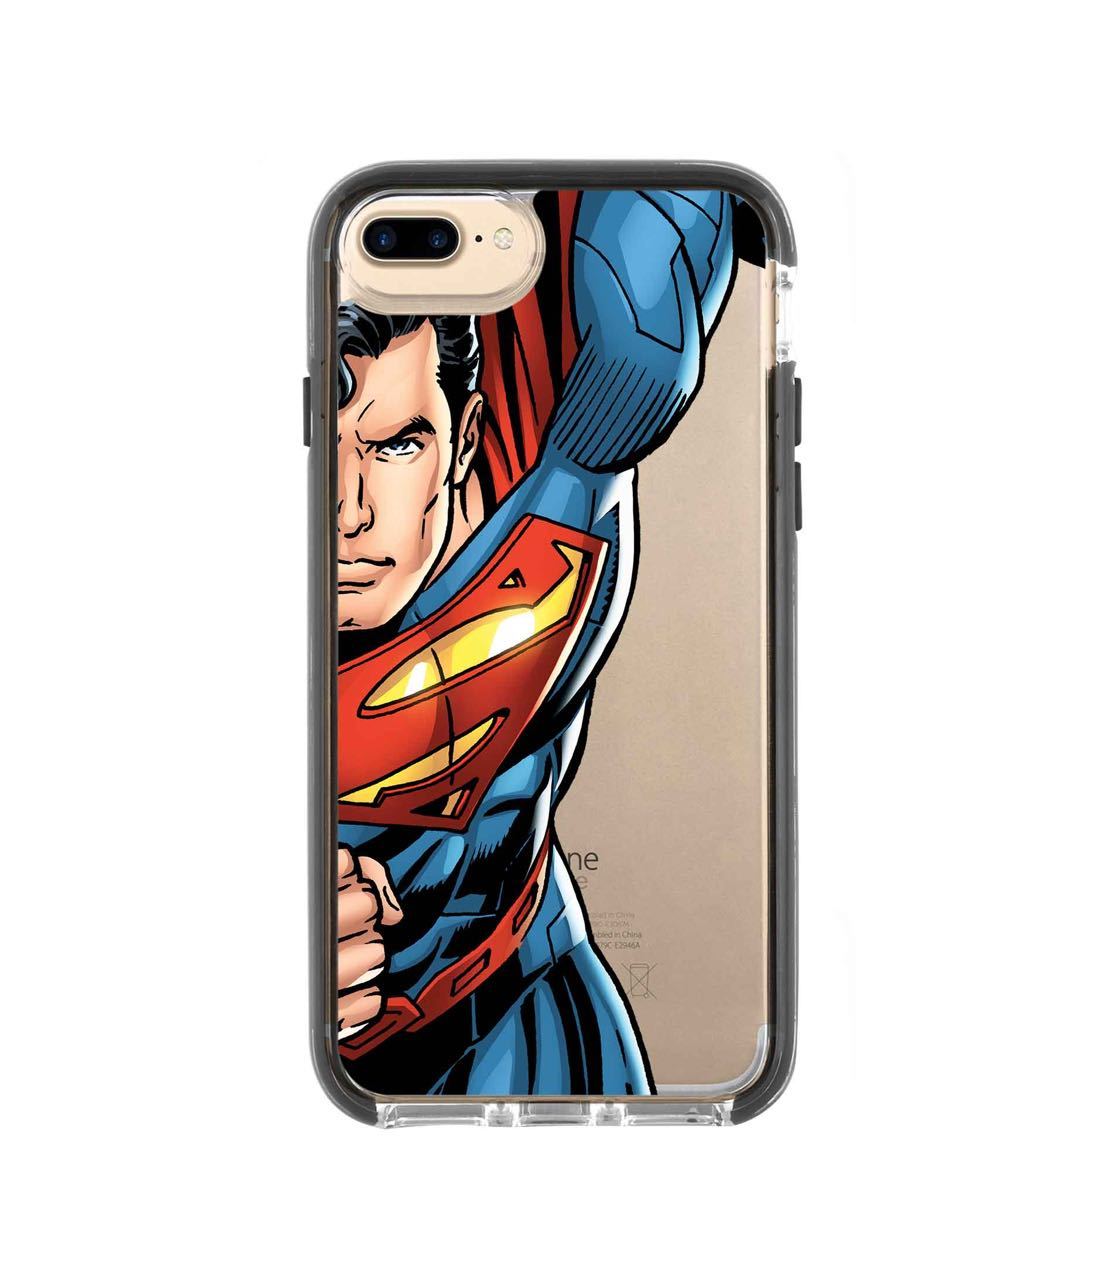 Speed it like Superman - Extreme Phone Case for iPhone 7 Plus